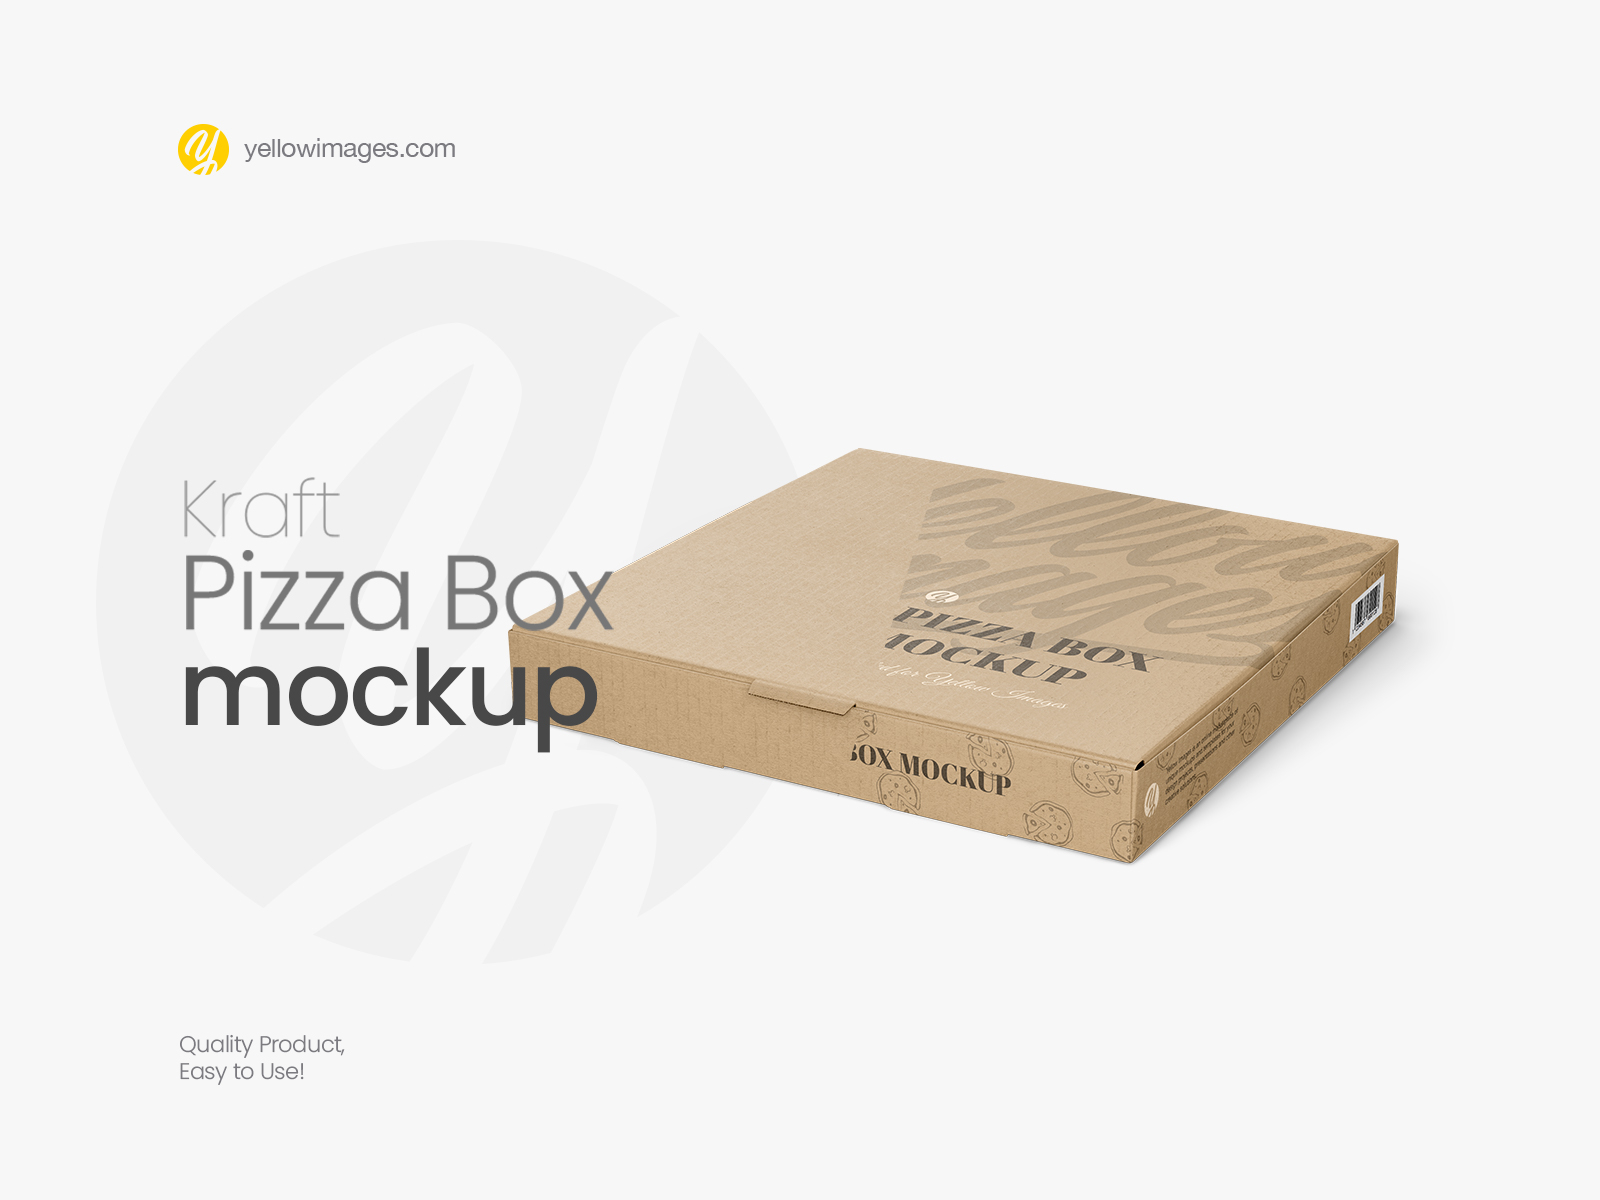 Download Wooden Box Mockup Psd Download Free And Premium Psd Mockup Templates And Design Assets